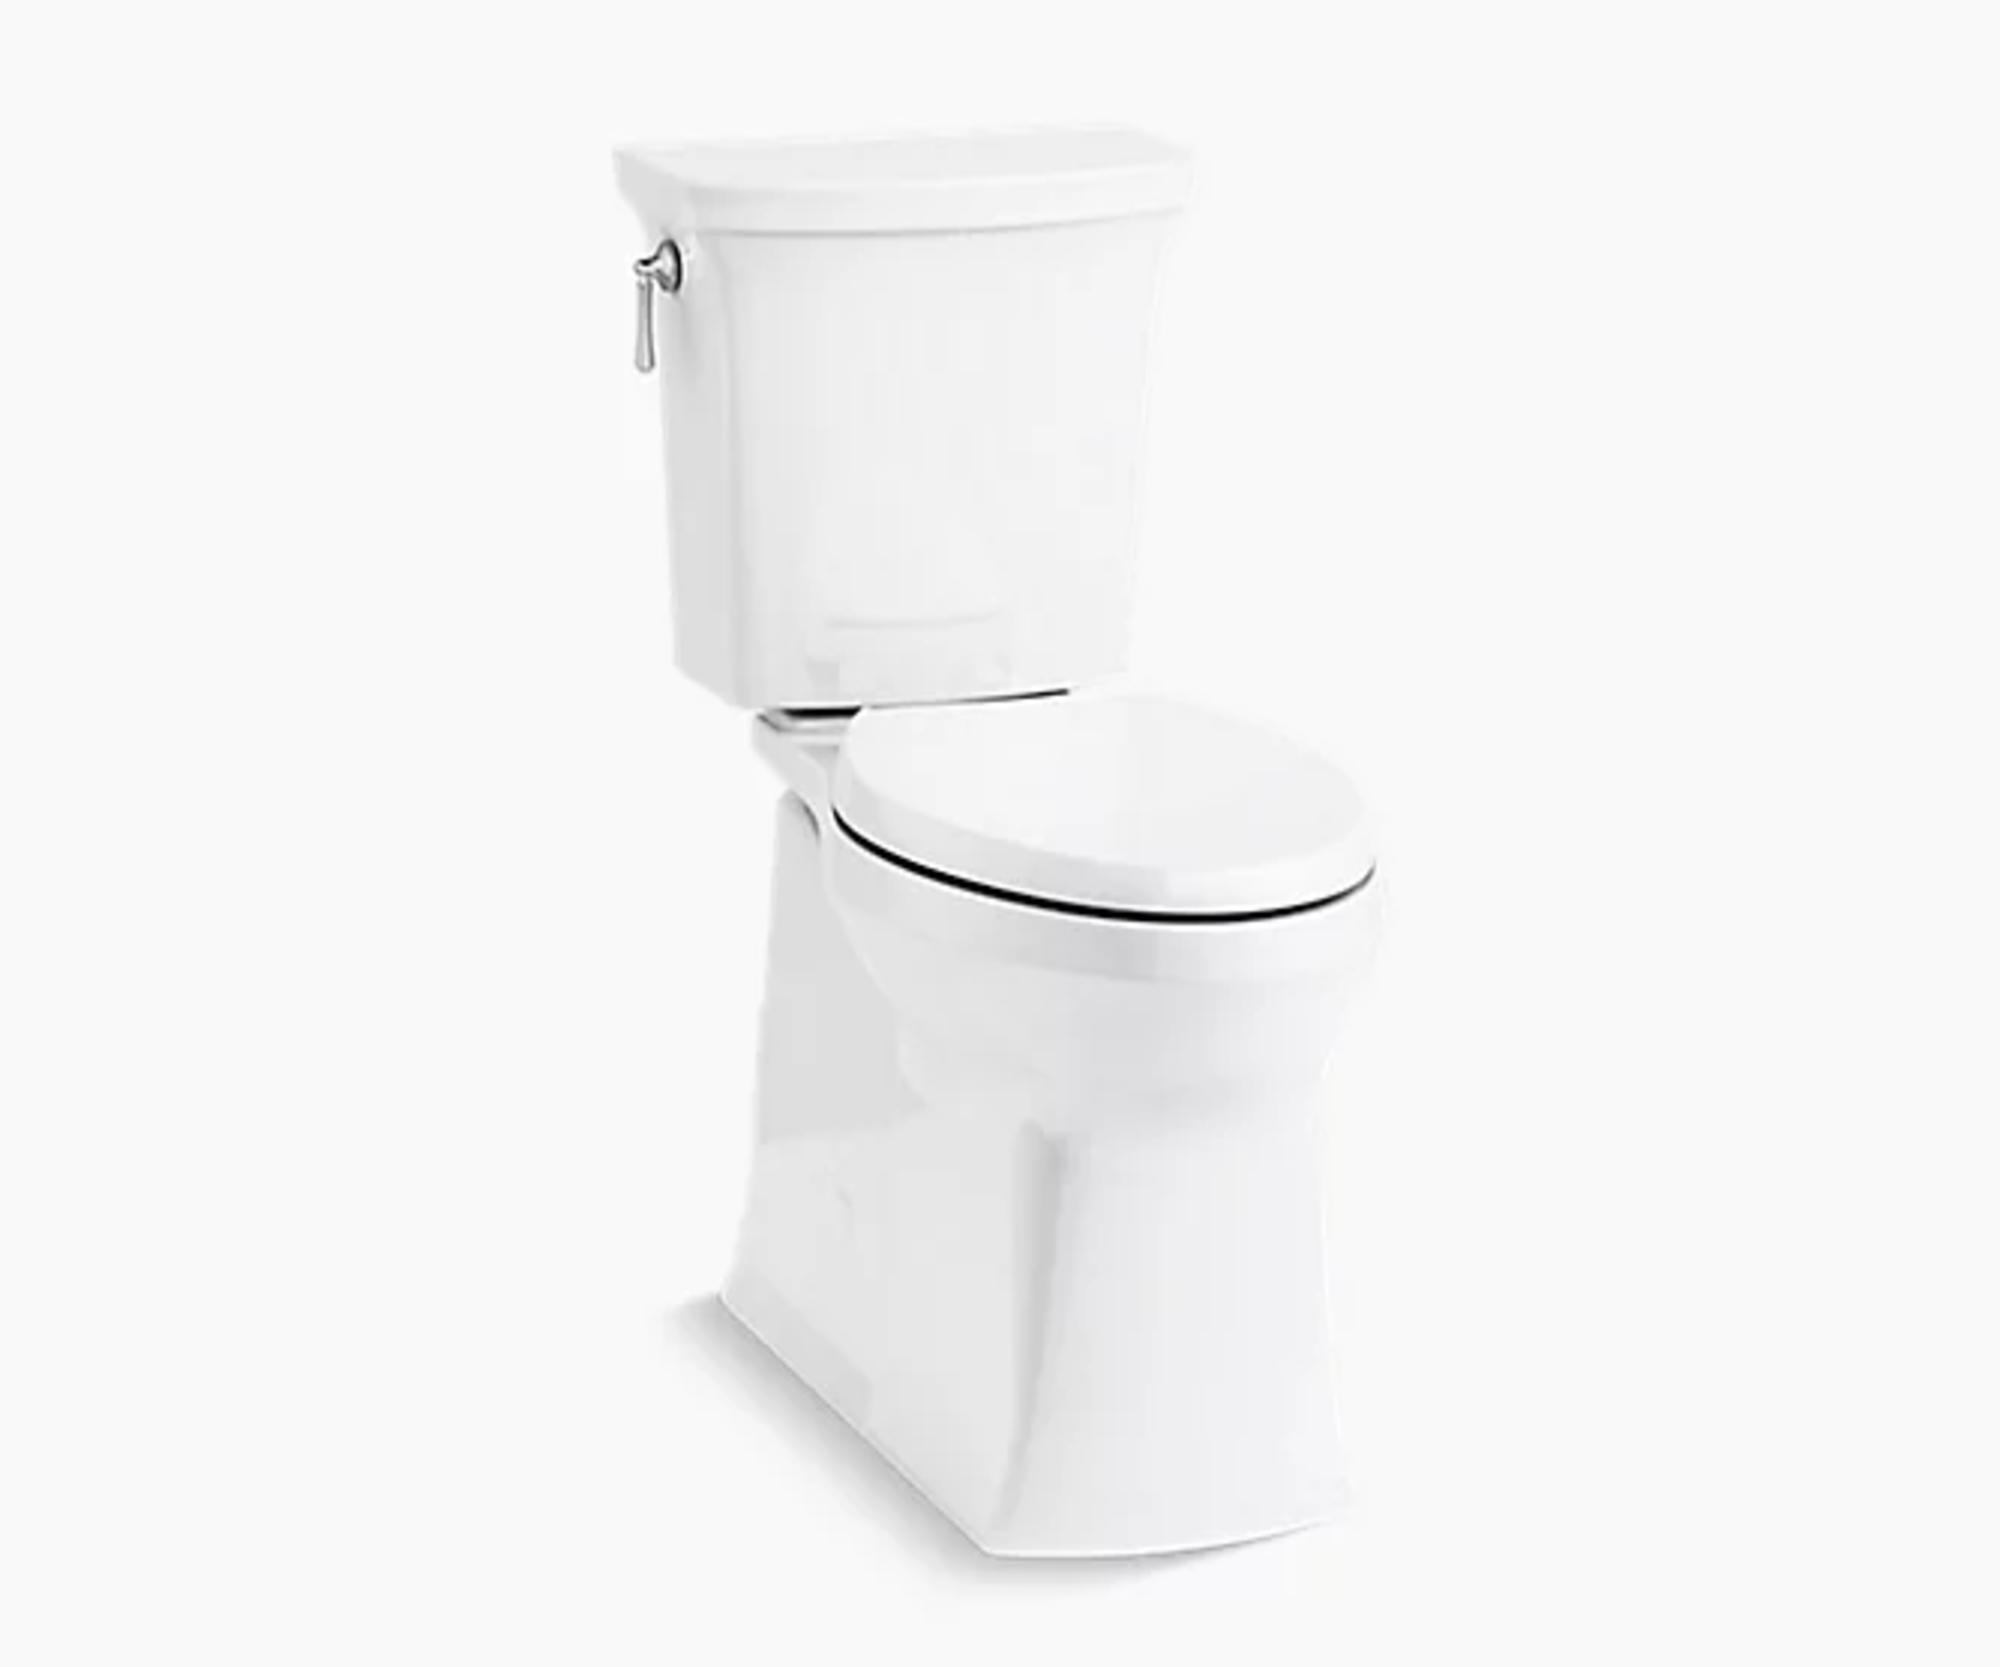 Two-piece elongated 1.28 gpf toilet-related